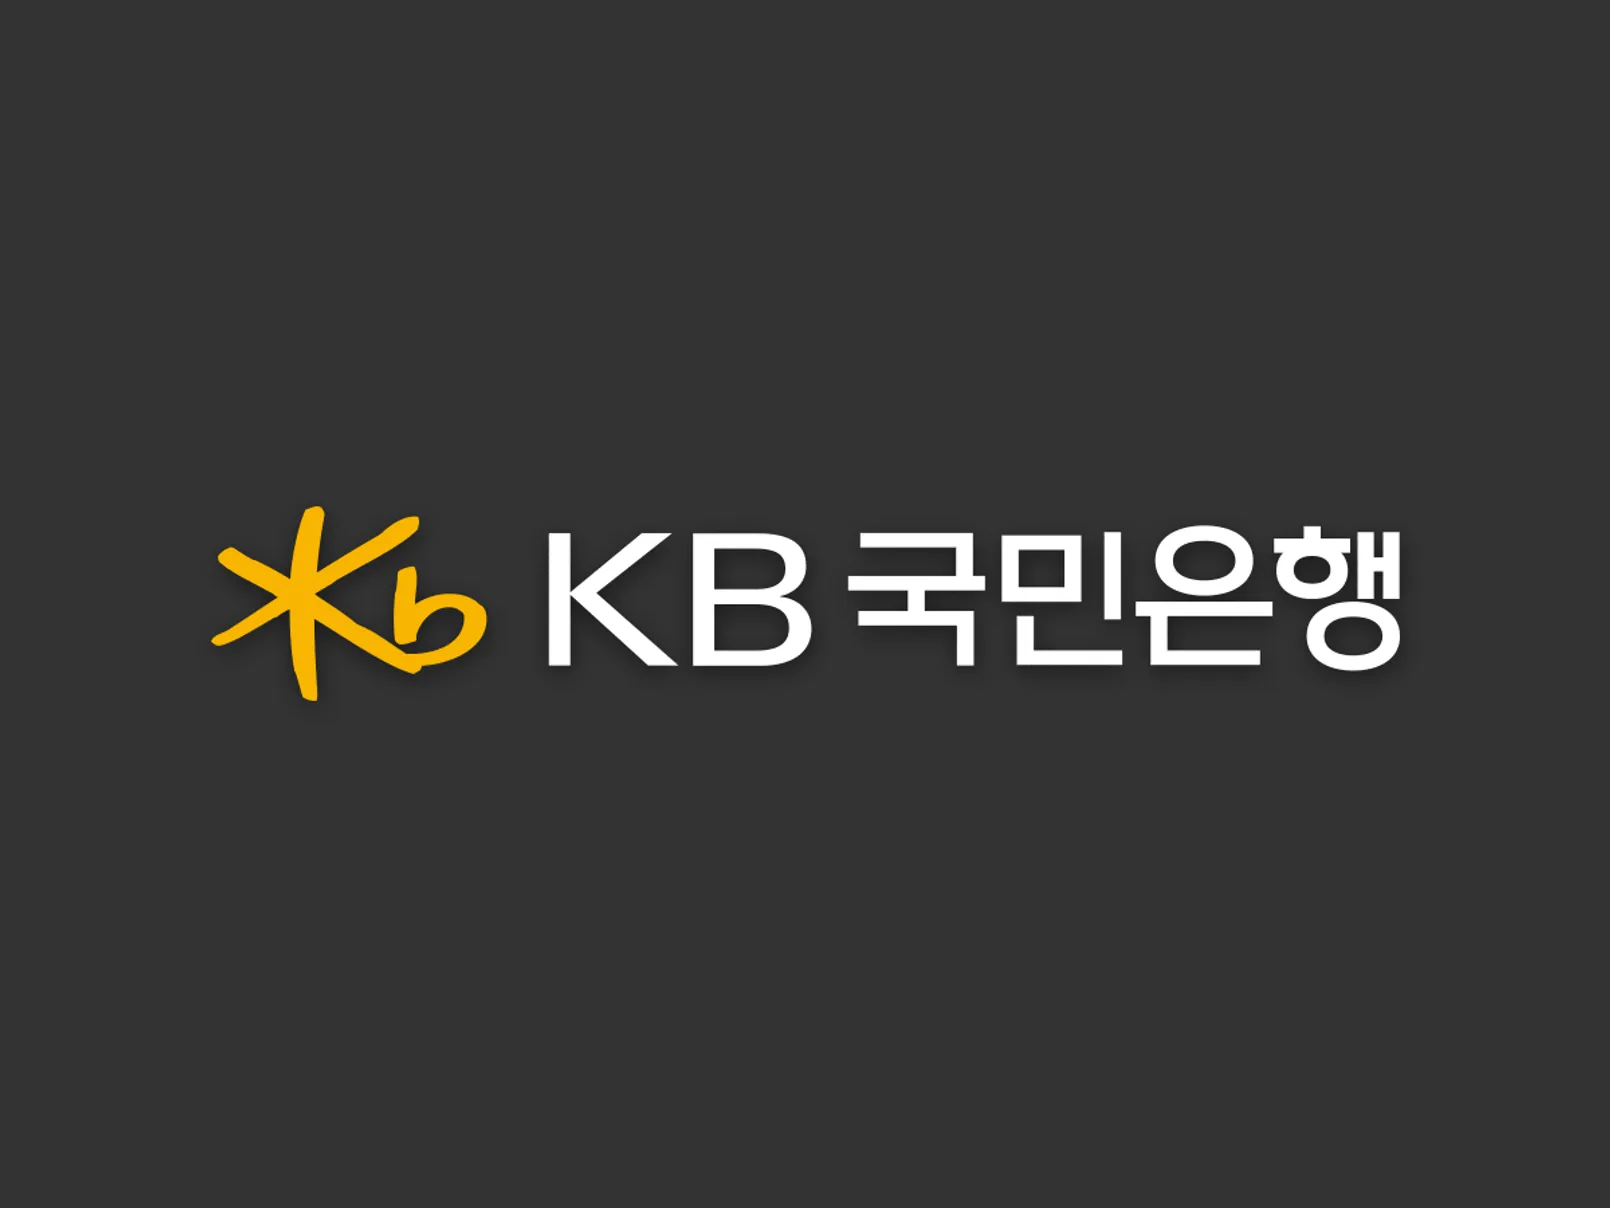 Kb Bank High Res Title.png.jpg